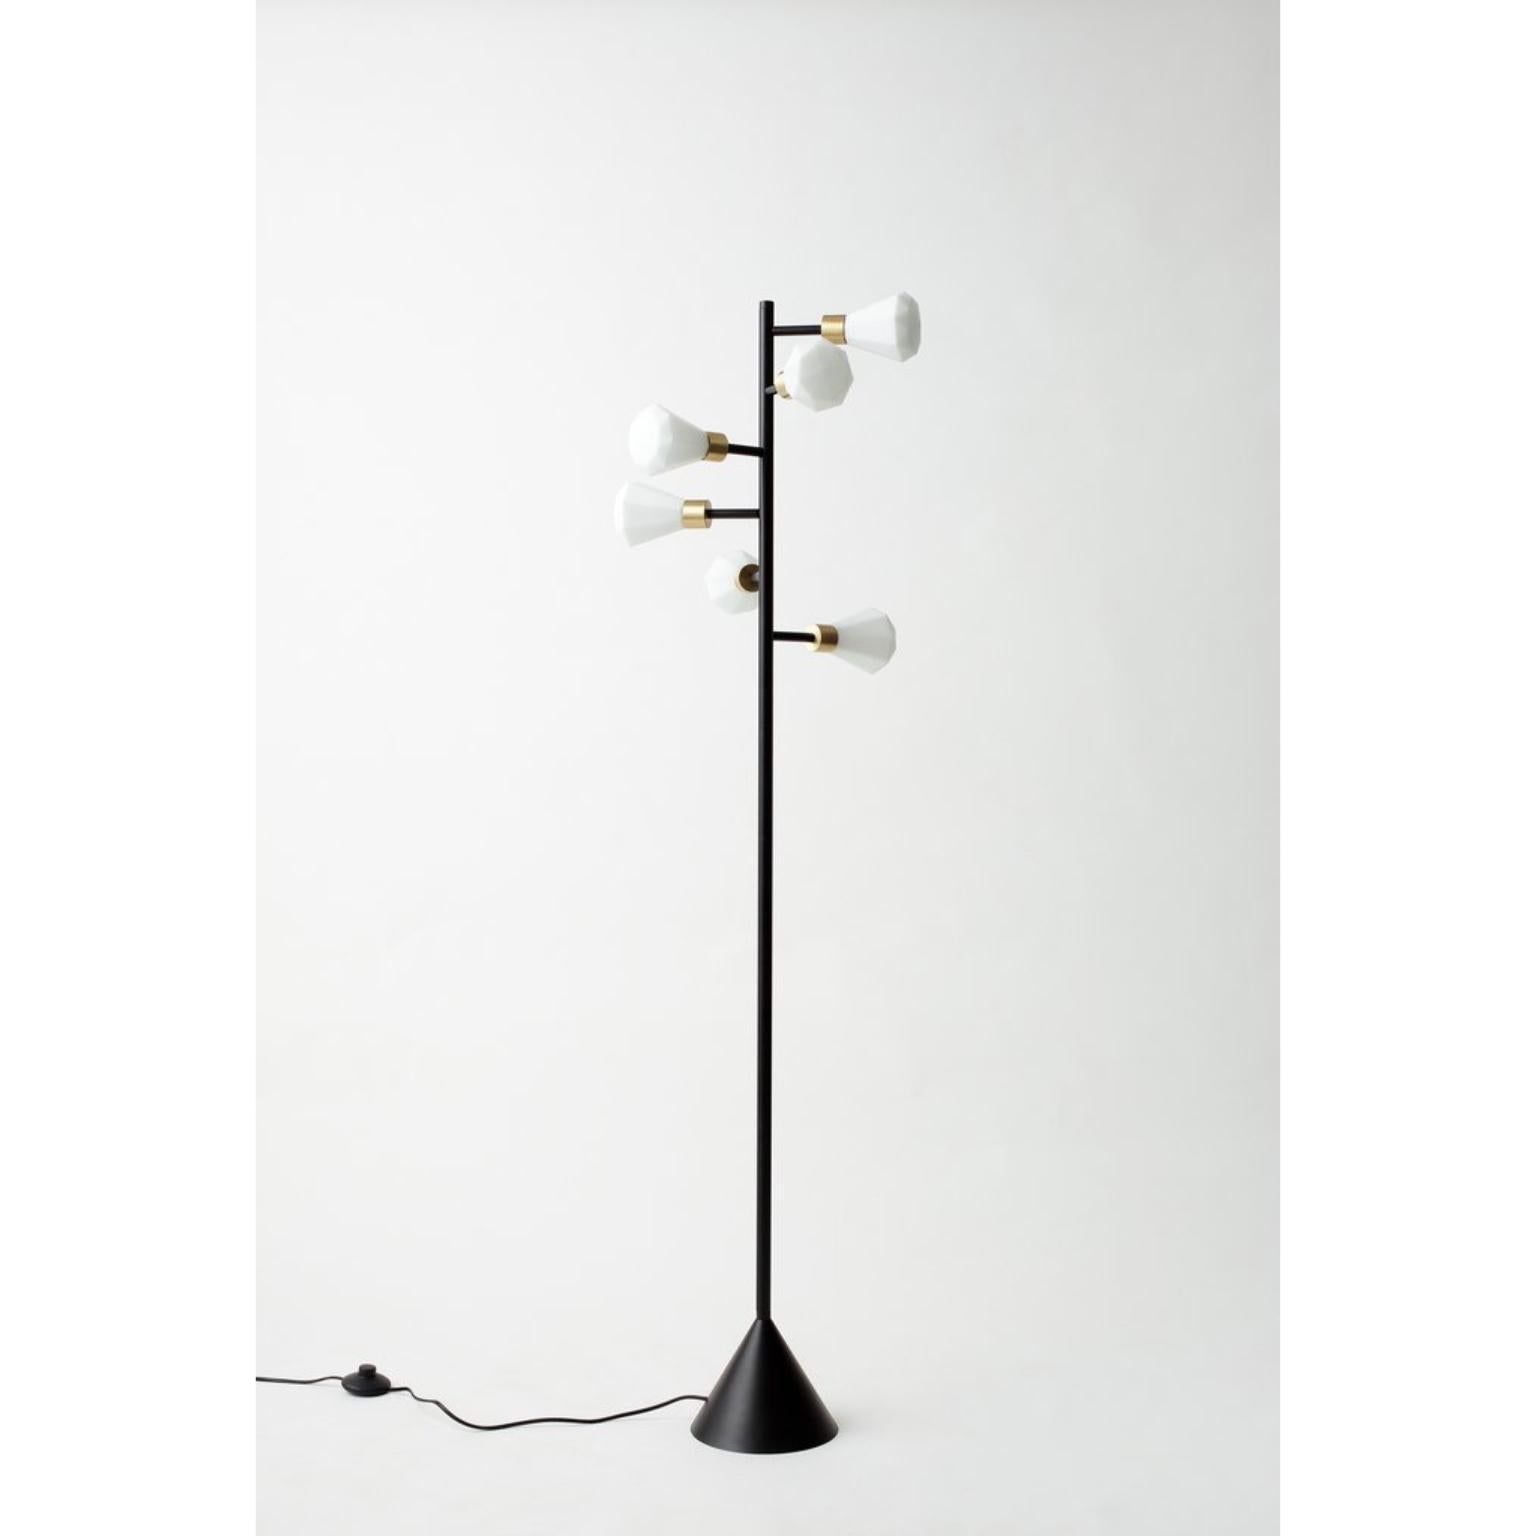 Unique spiral floor lamp by Hatsu
Dimensions: W 36 x H 149 cm 
Materials: Opal glass with powdercoated aluminium, brass details

Hatsu is a design studio based in Mumbai that creates modern lighting that are unique and immediately recognisable. We